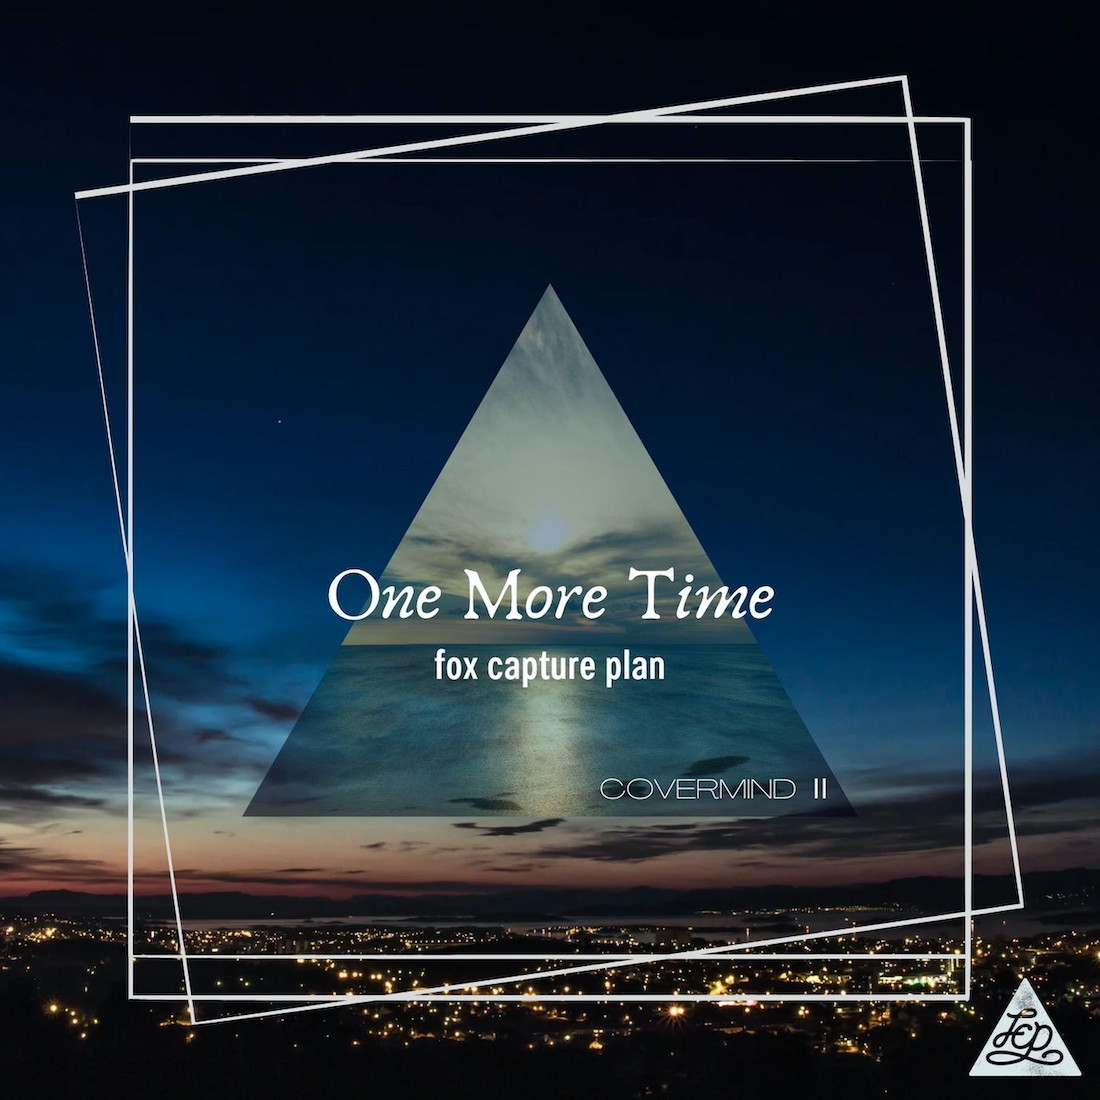 「One More Time」